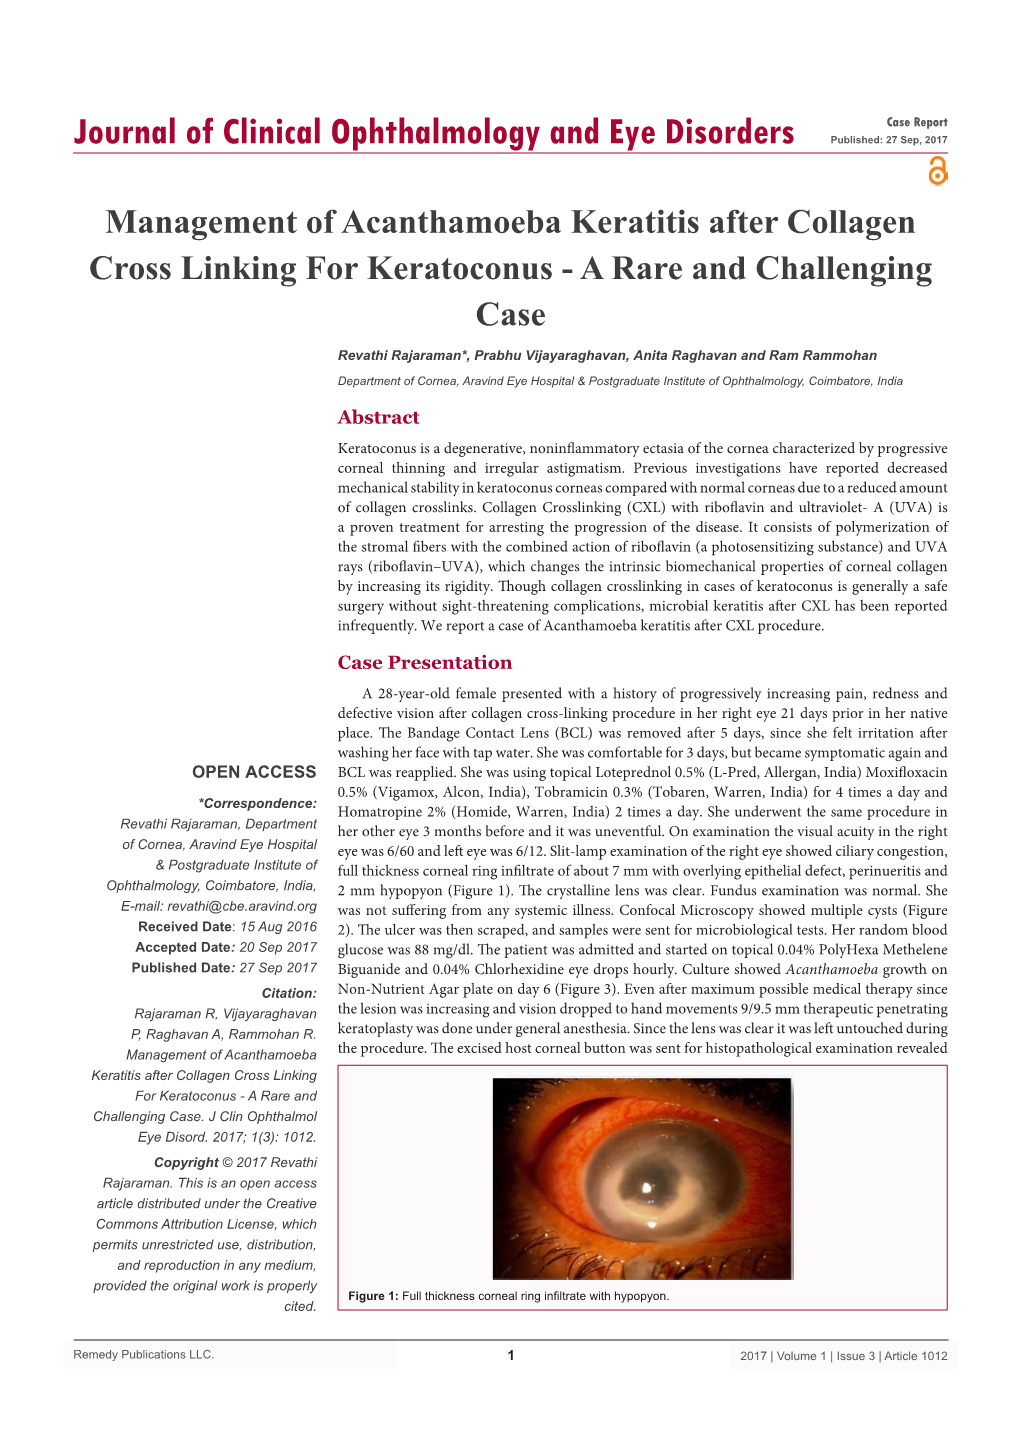 Management of Acanthamoeba Keratitis After Collagen Cross Linking for Keratoconus - a Rare and Challenging Case